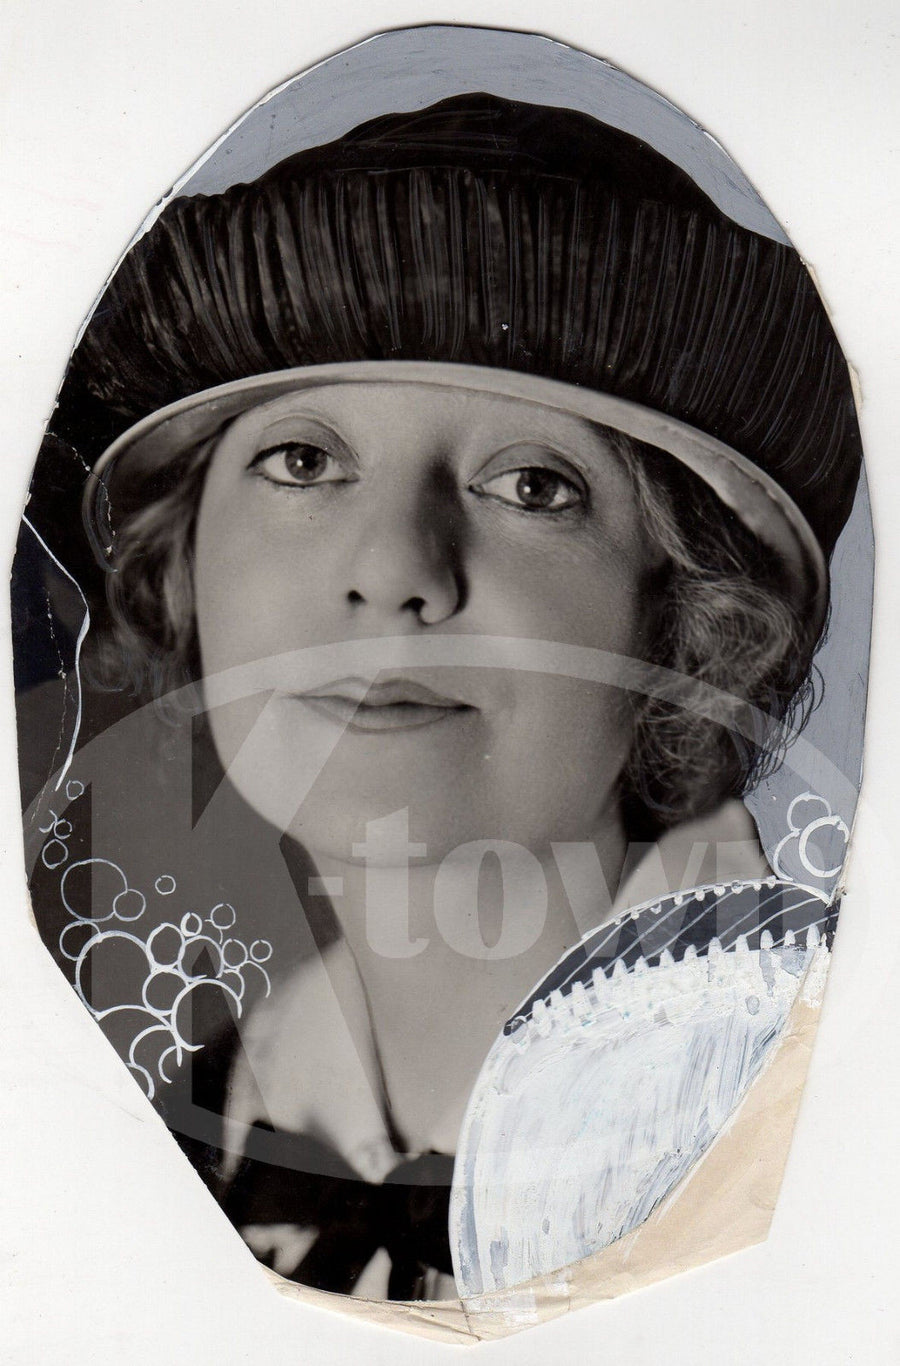 MAUDE FULTON BROADWAY STAGE ACTRESS VINTAGE PASTE-UP PRESS PHOTO - K-townConsignments